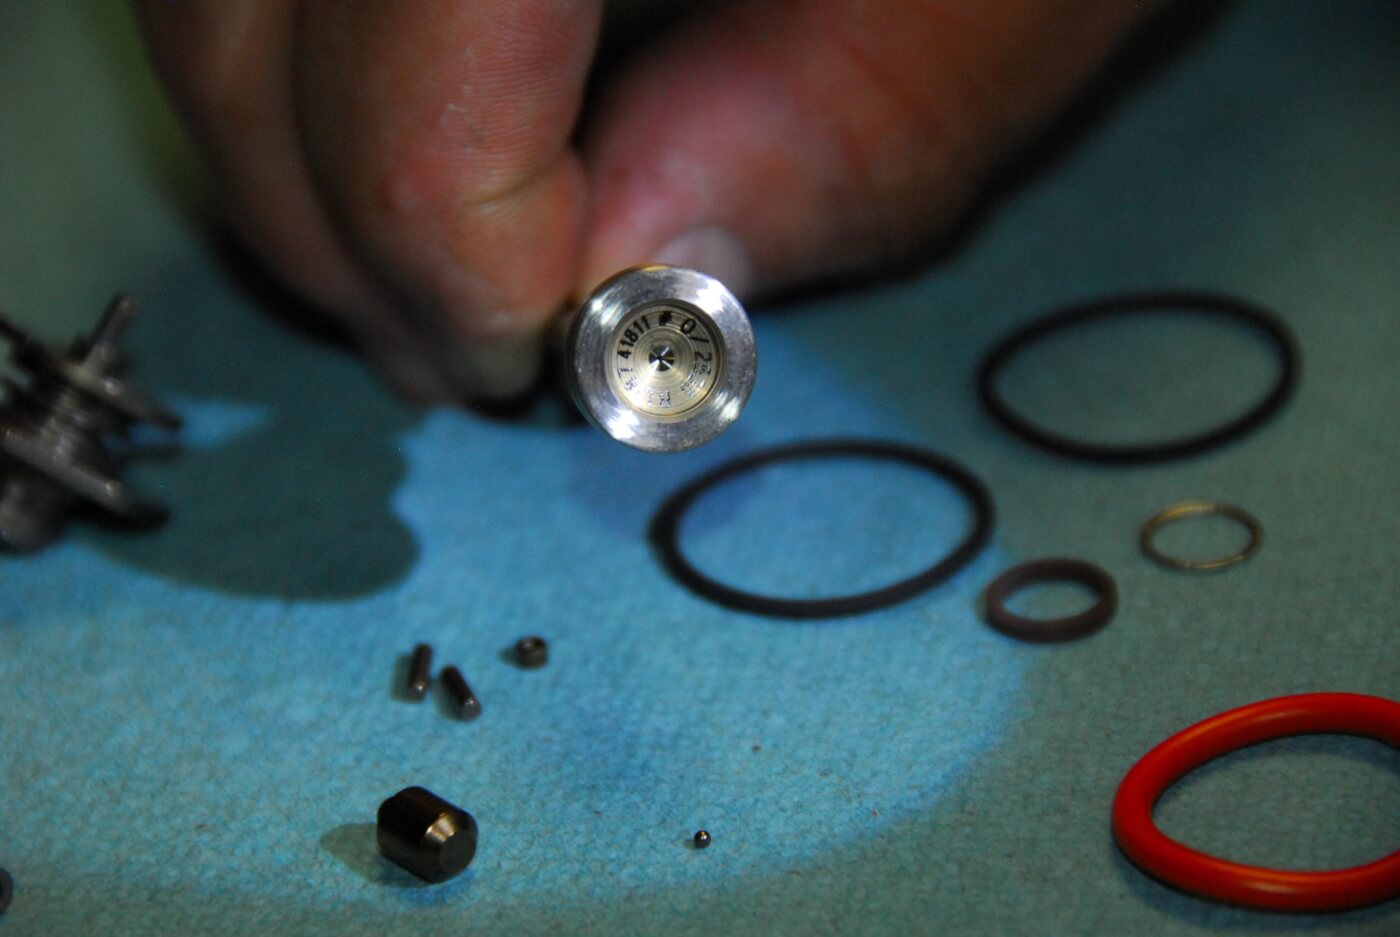 6. Here’s a close-up of the ball seat of the valve set. Look closely, and you’ll see a small ball on the table, directly below. This 1mm pellet is a critical component in the functioning of the injector. If the seat for the ball is even slightly damaged (usually by moisture or debris) the injector won’t function properly.